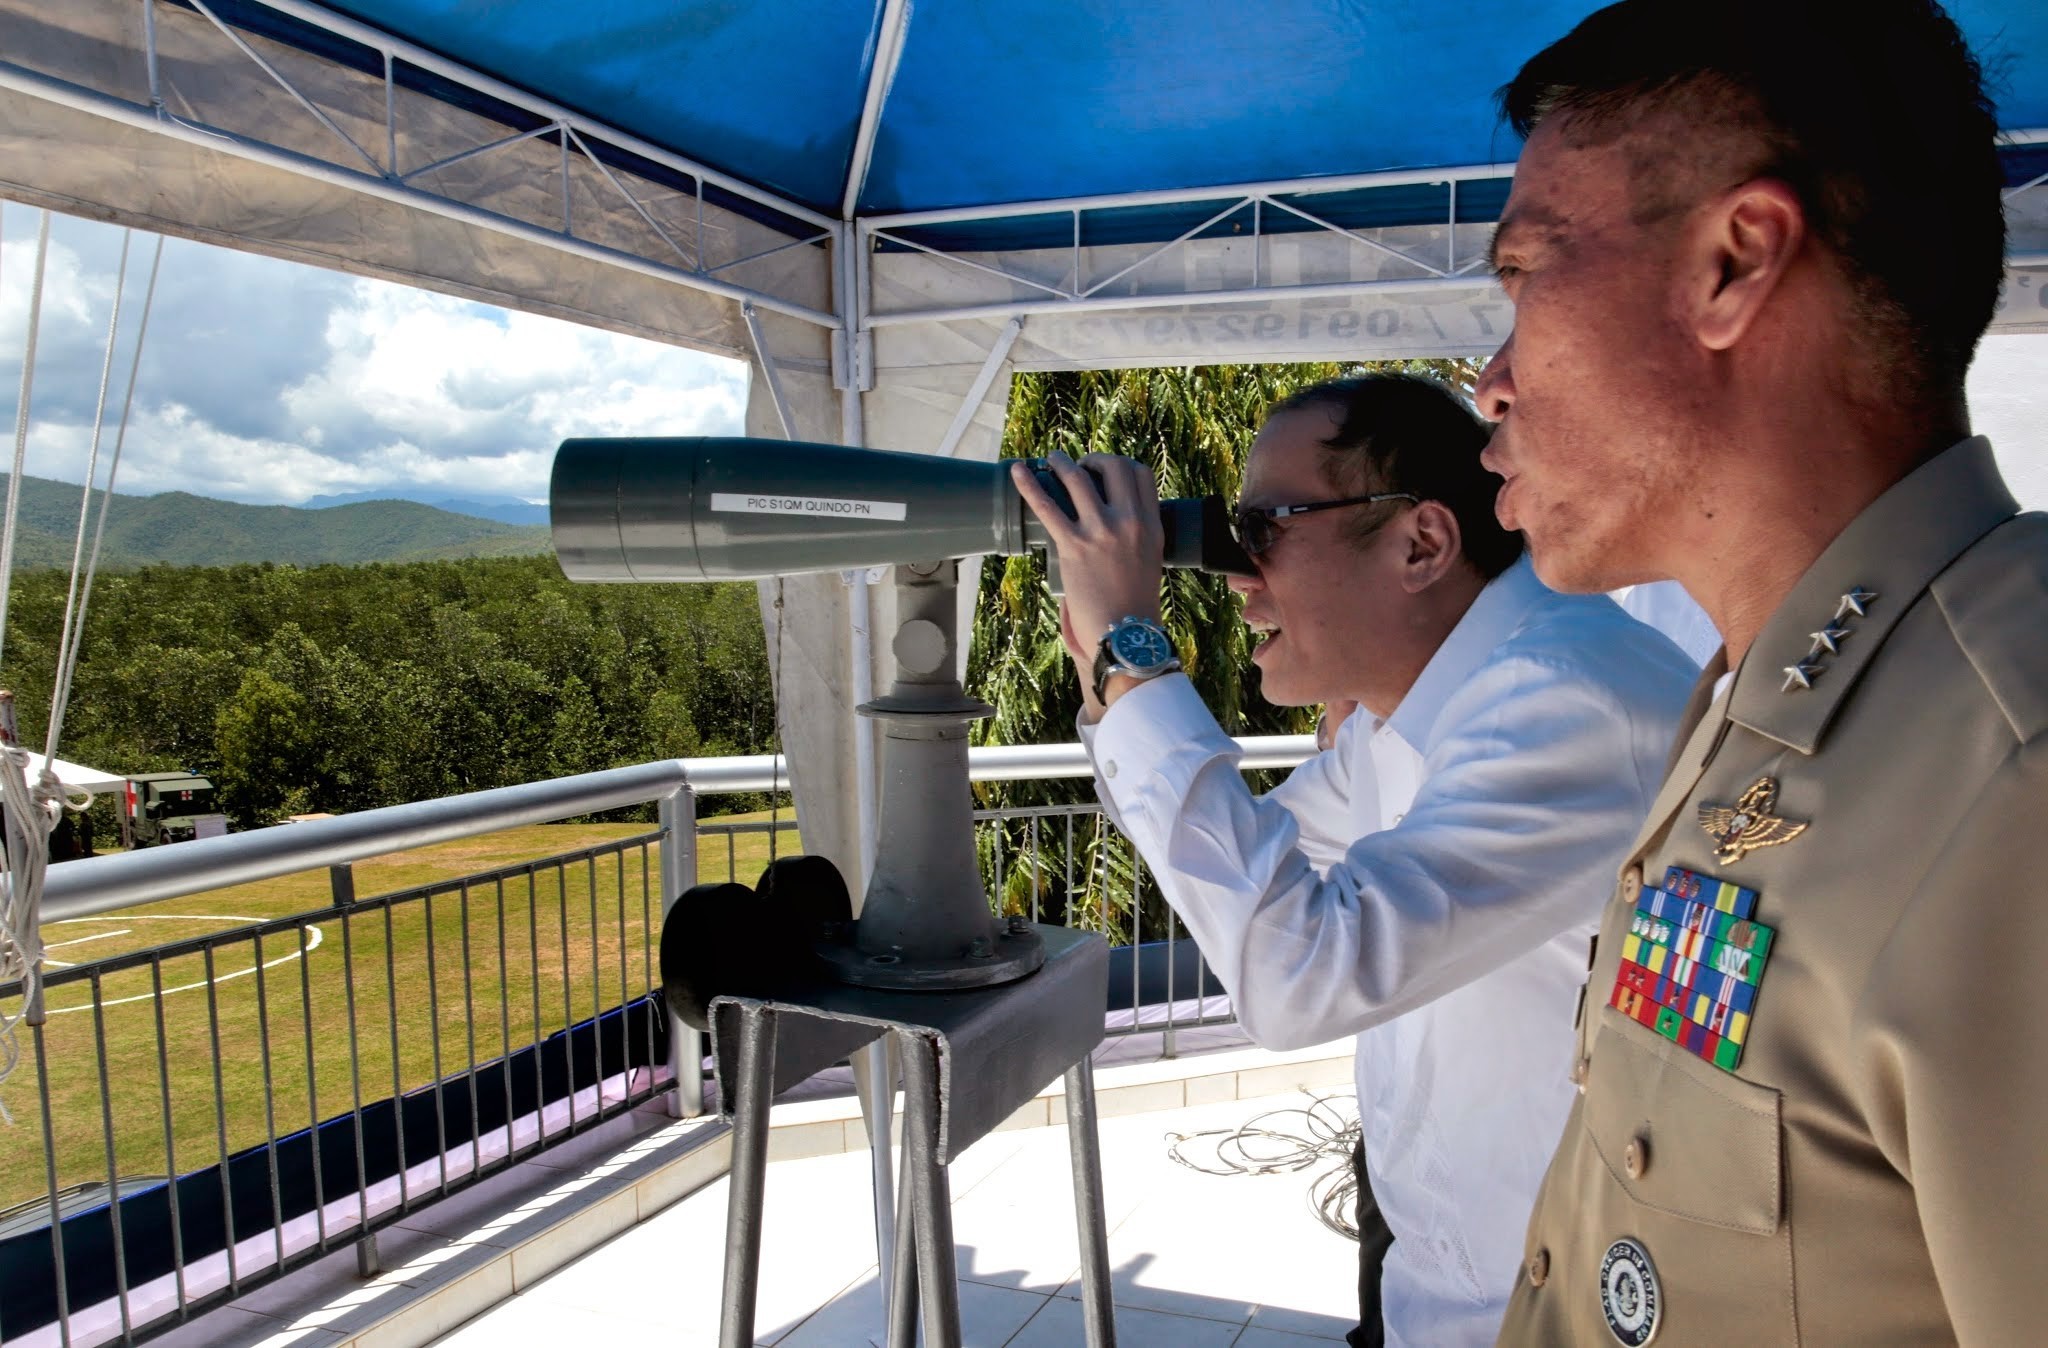 President Benigno S. Aquino III checks out the view of the West Philippine Sea from the administration building of Philippine Navy headquarters in Palawan during the 116th Anniversary of the Philippine Navy at the open grounds of the Naval Forces West naval station, Puerto Princesa City, Palawan on Tuesday (May 27). (Photo by Gil Nartea / Malacañang Photo Bureau)